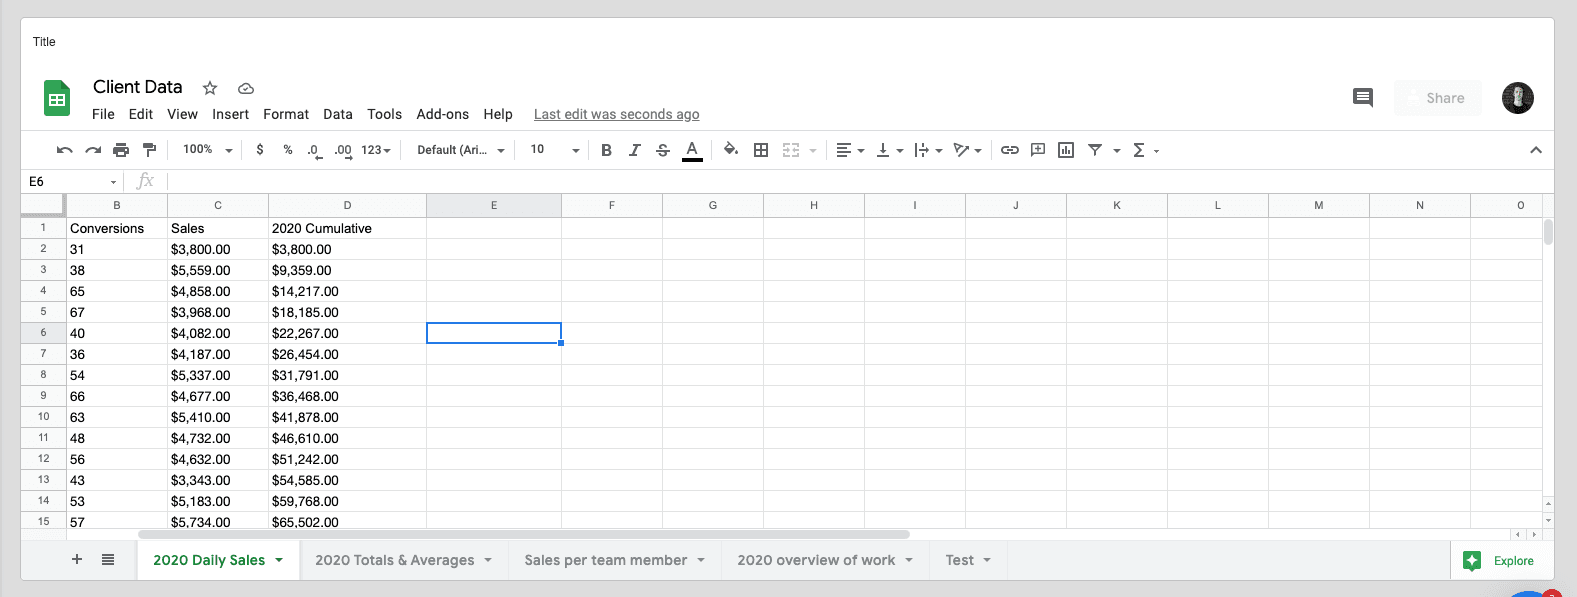 Process for Embedding Google Sheets Into a Marketing Dashboard